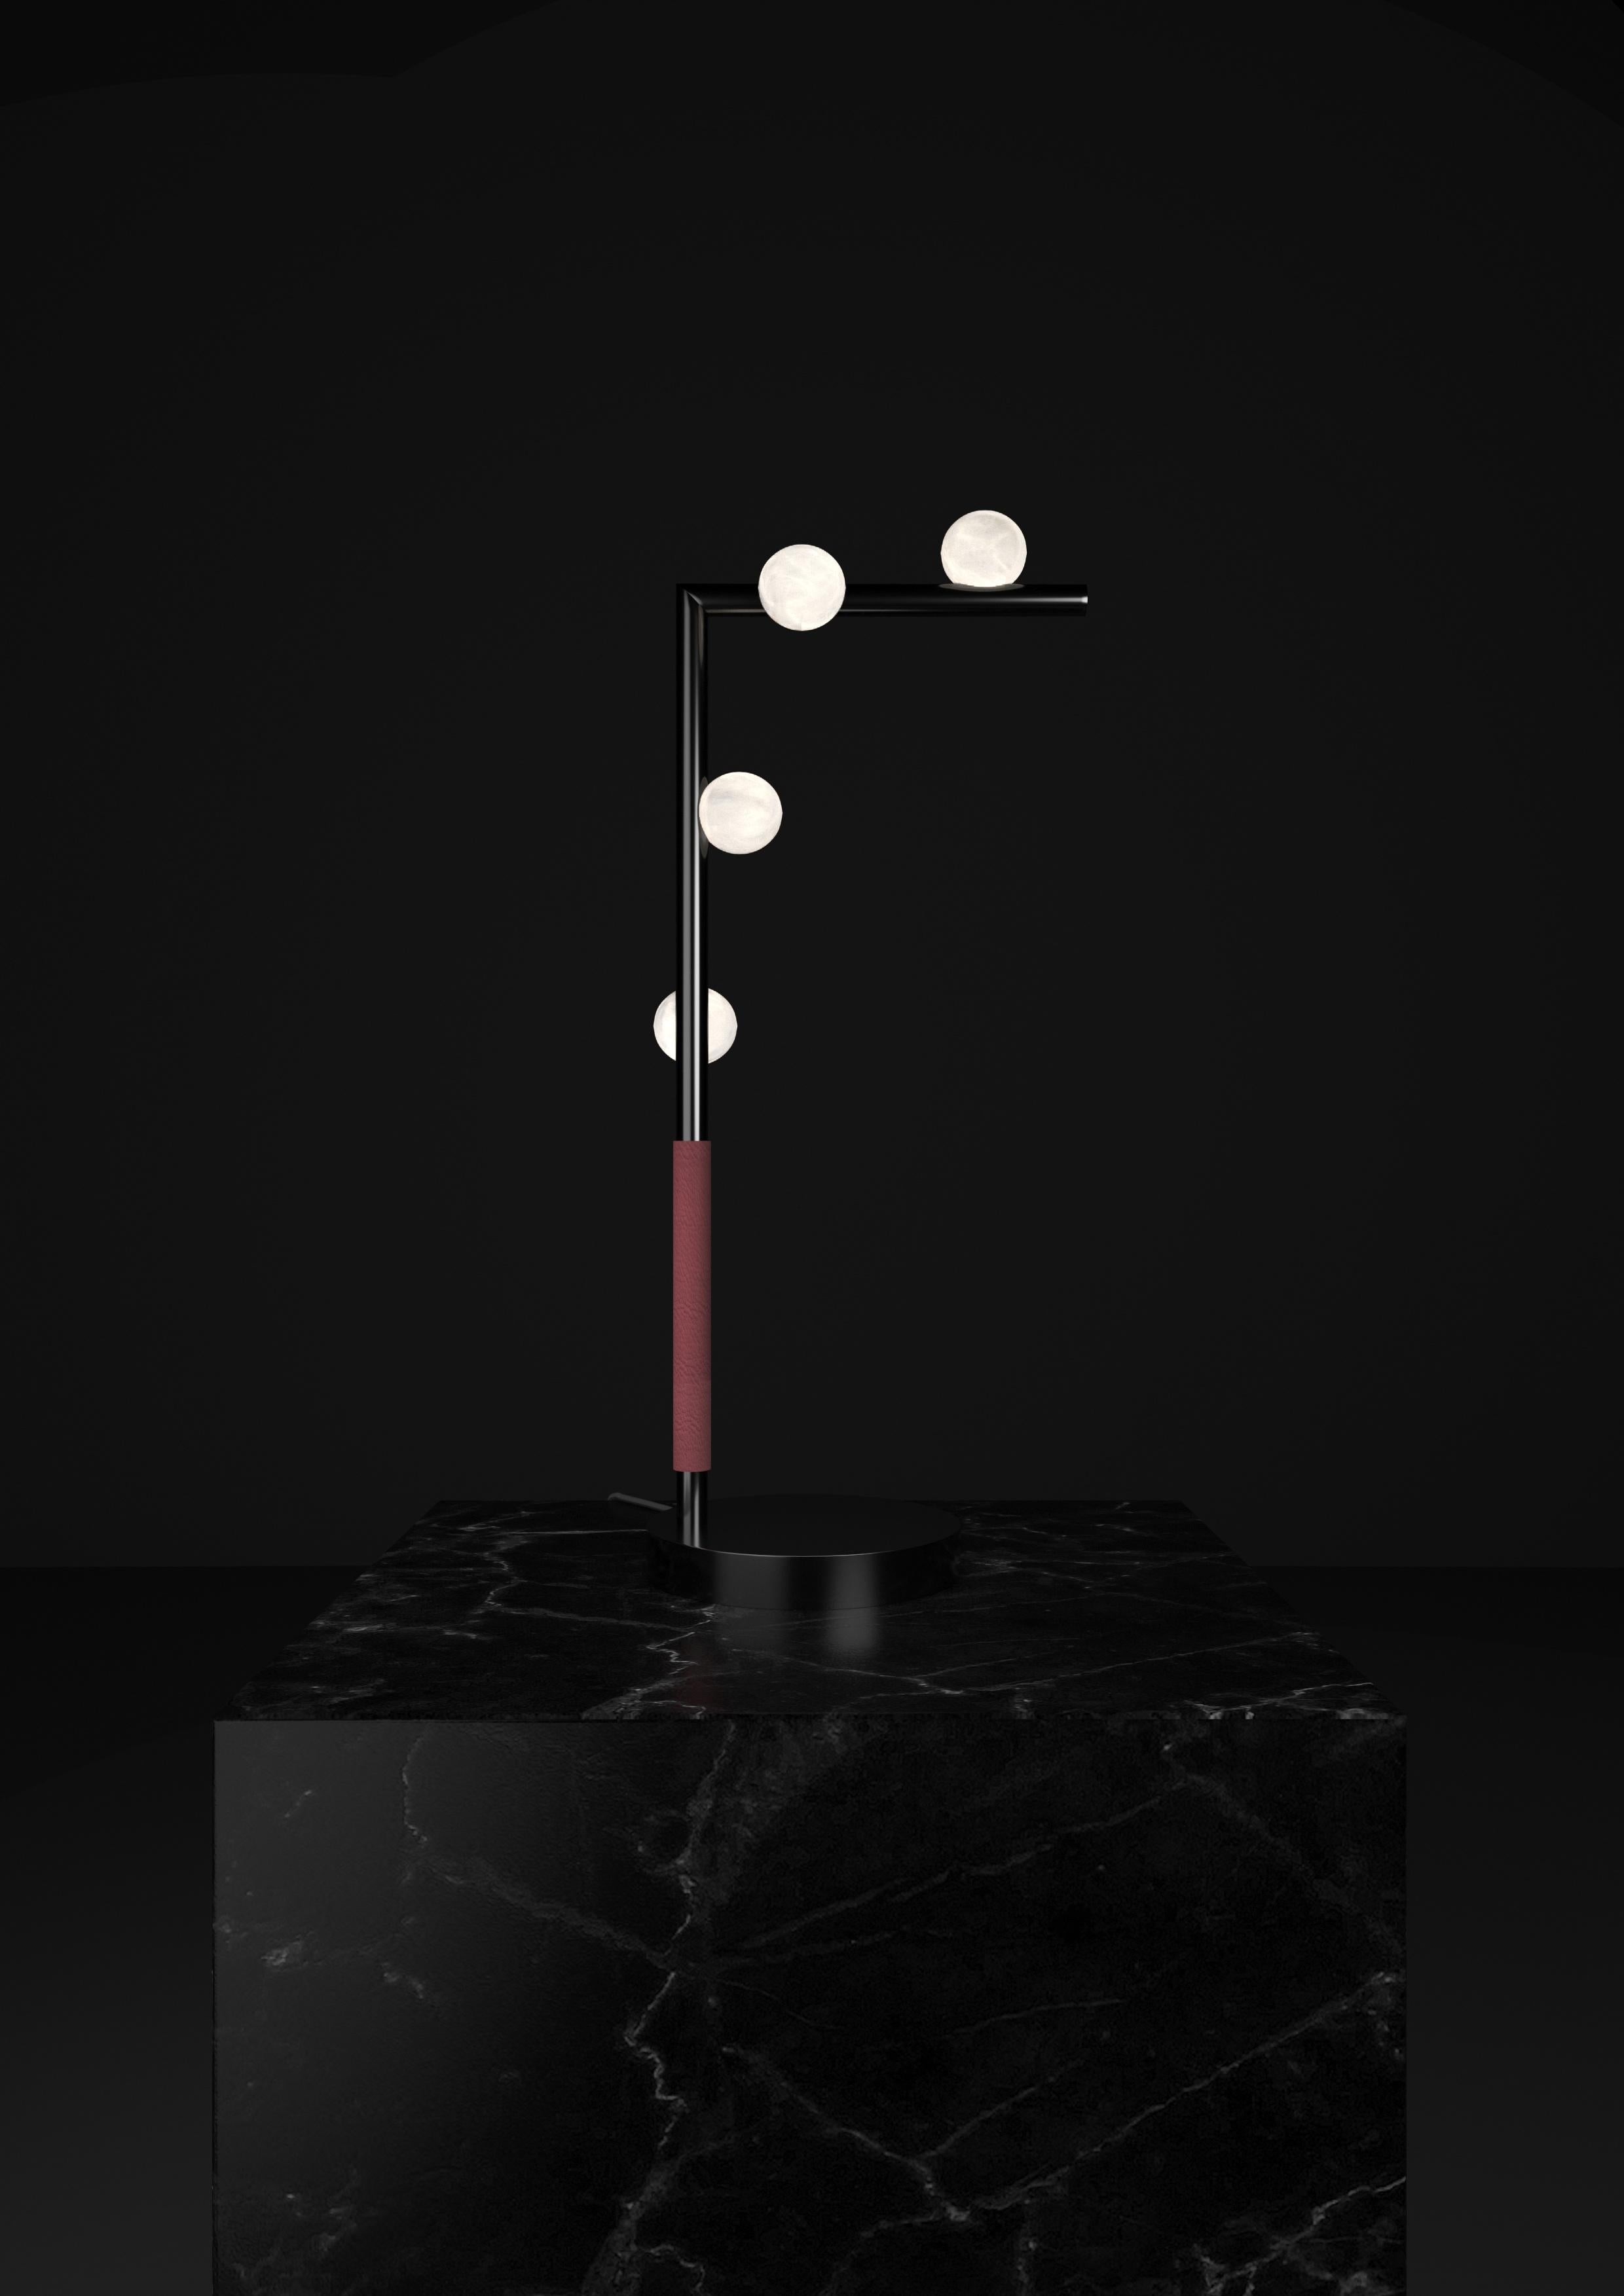 Demetra Shiny Black Metal Table Lamp by Alabastro Italiano
Dimensions: D 20 x W 35 x H 67 cm.
Materials: White alabaster, metal and leather.

Available in different finishes: Shiny Silver, Bronze, Brushed Brass, Ruggine of Florence, Brushed